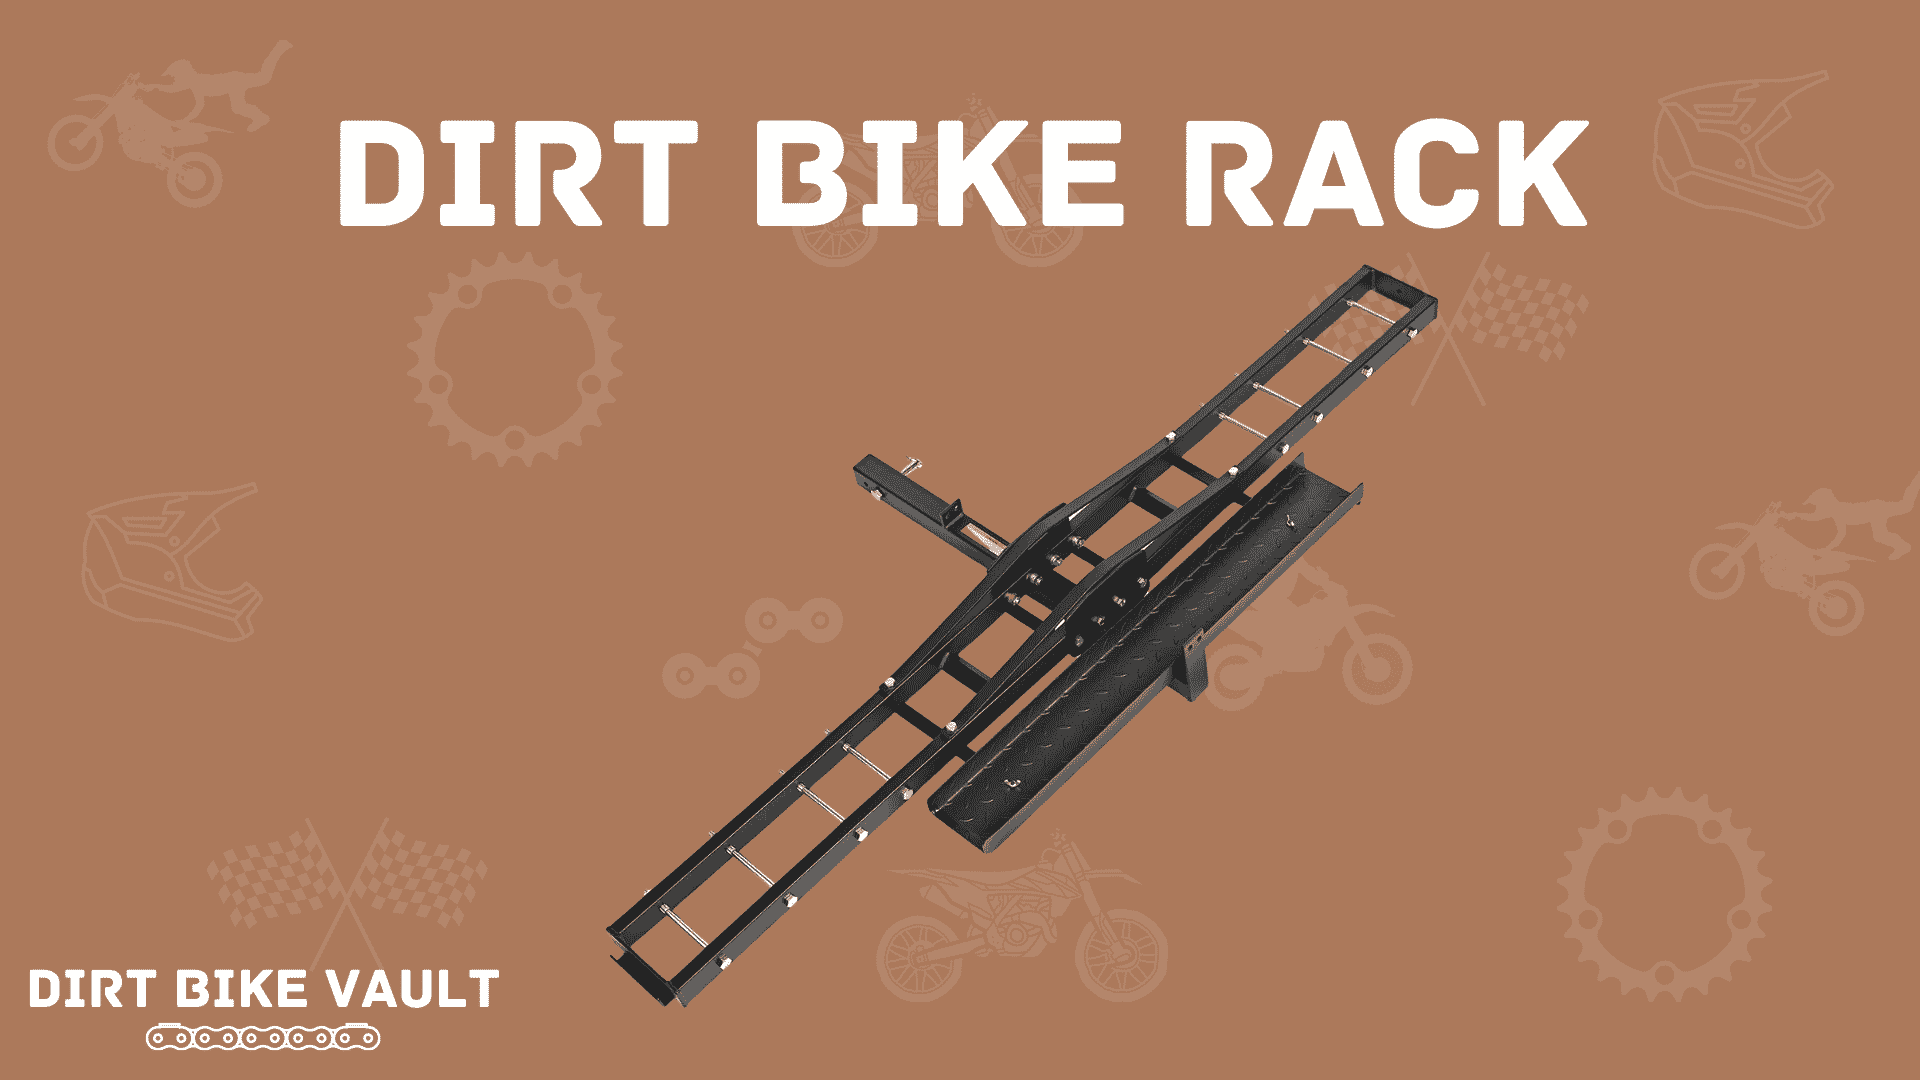 dirt bike rack in white text on brown background with image of dirt bike tow hitch